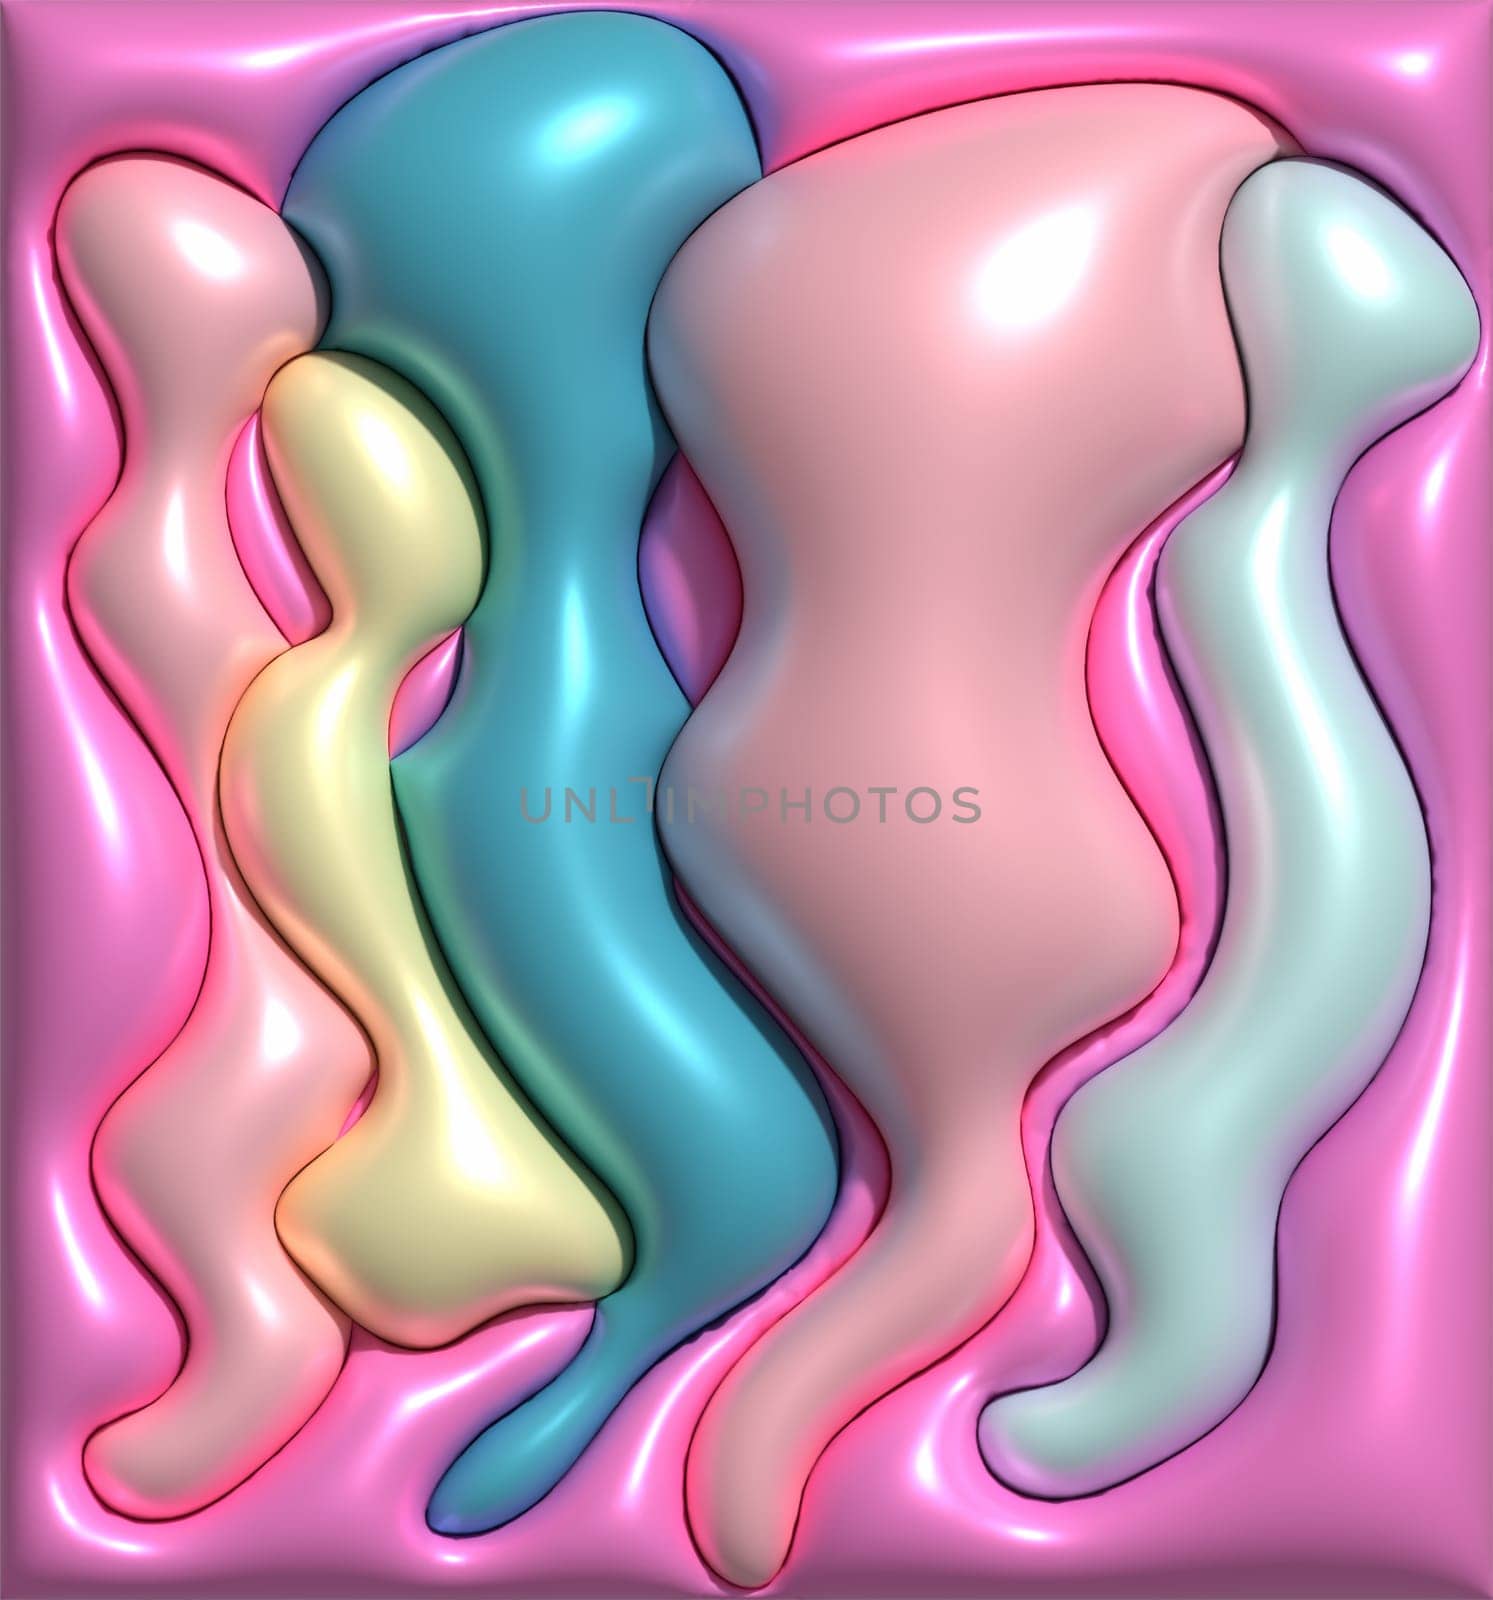 Abstract pink background with wavy shapes, 3D rendering illustration by ndanko